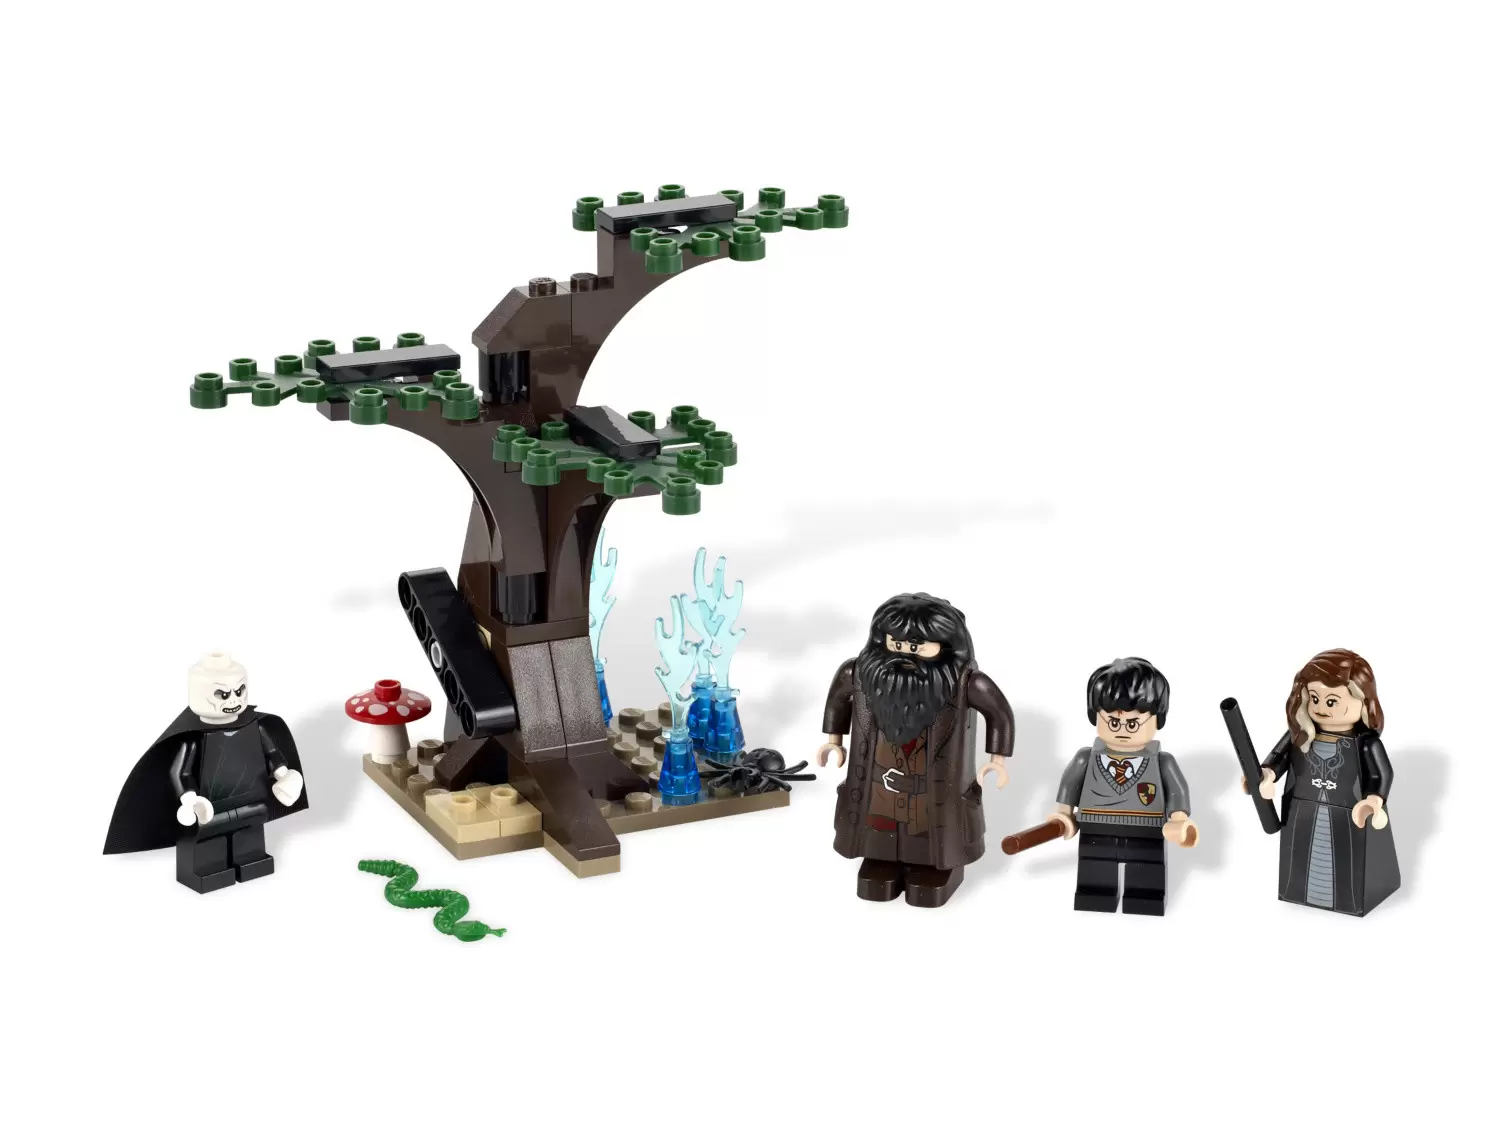 LEGO Harry Potter - The Forbidden Forest